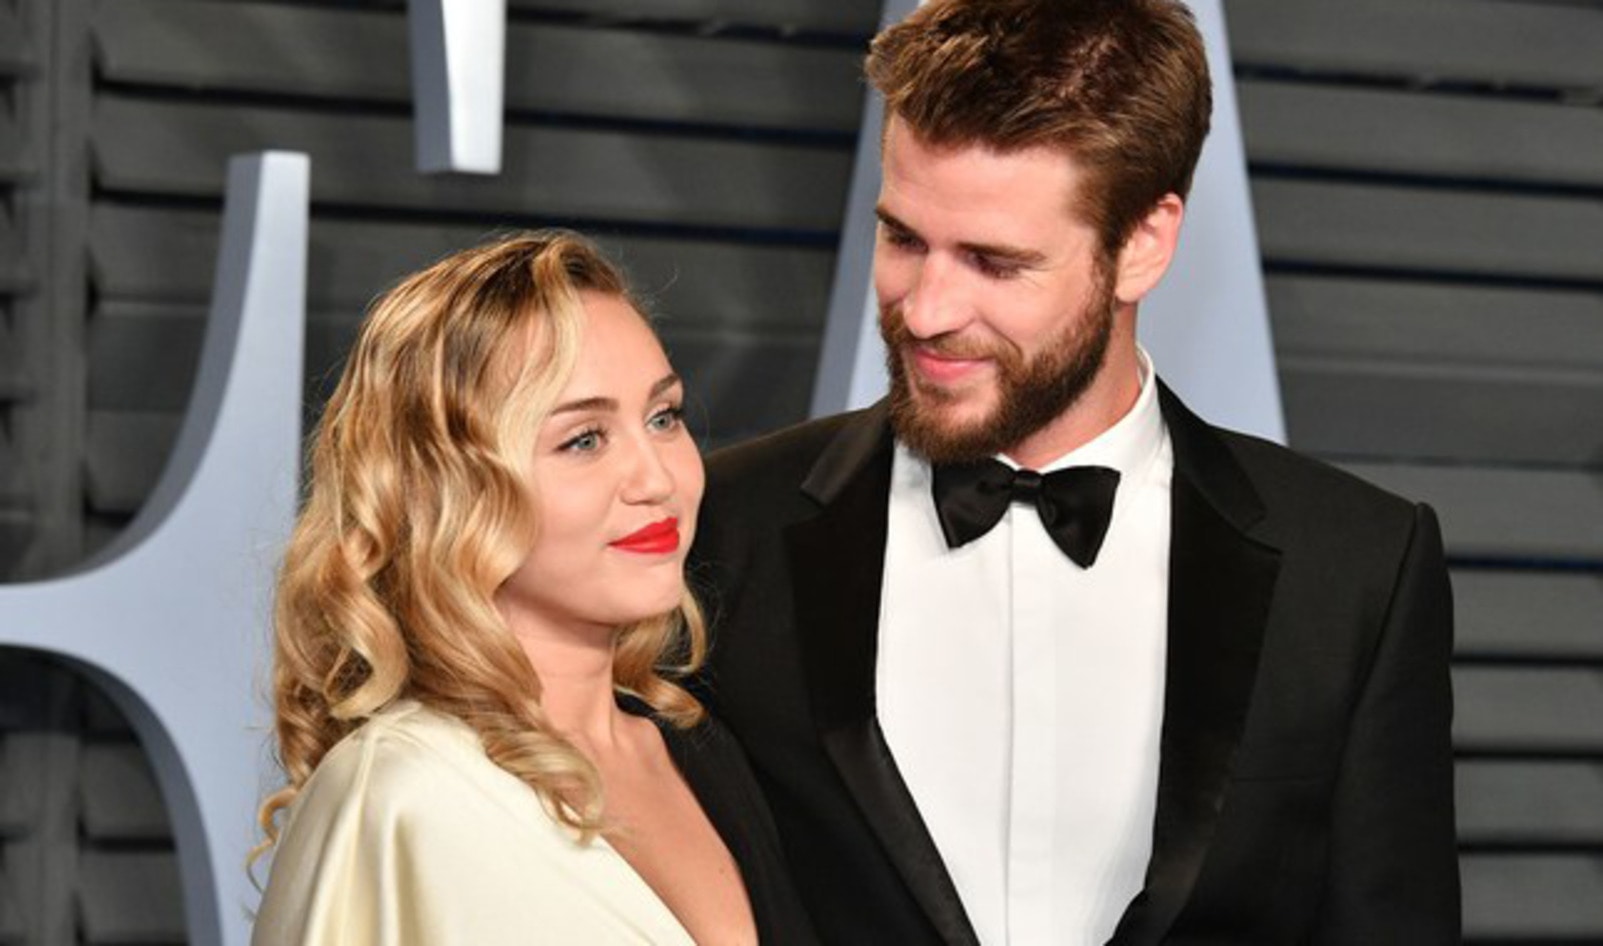 Miley Cyrus and Liam Hemsworth Married in Private Ceremony